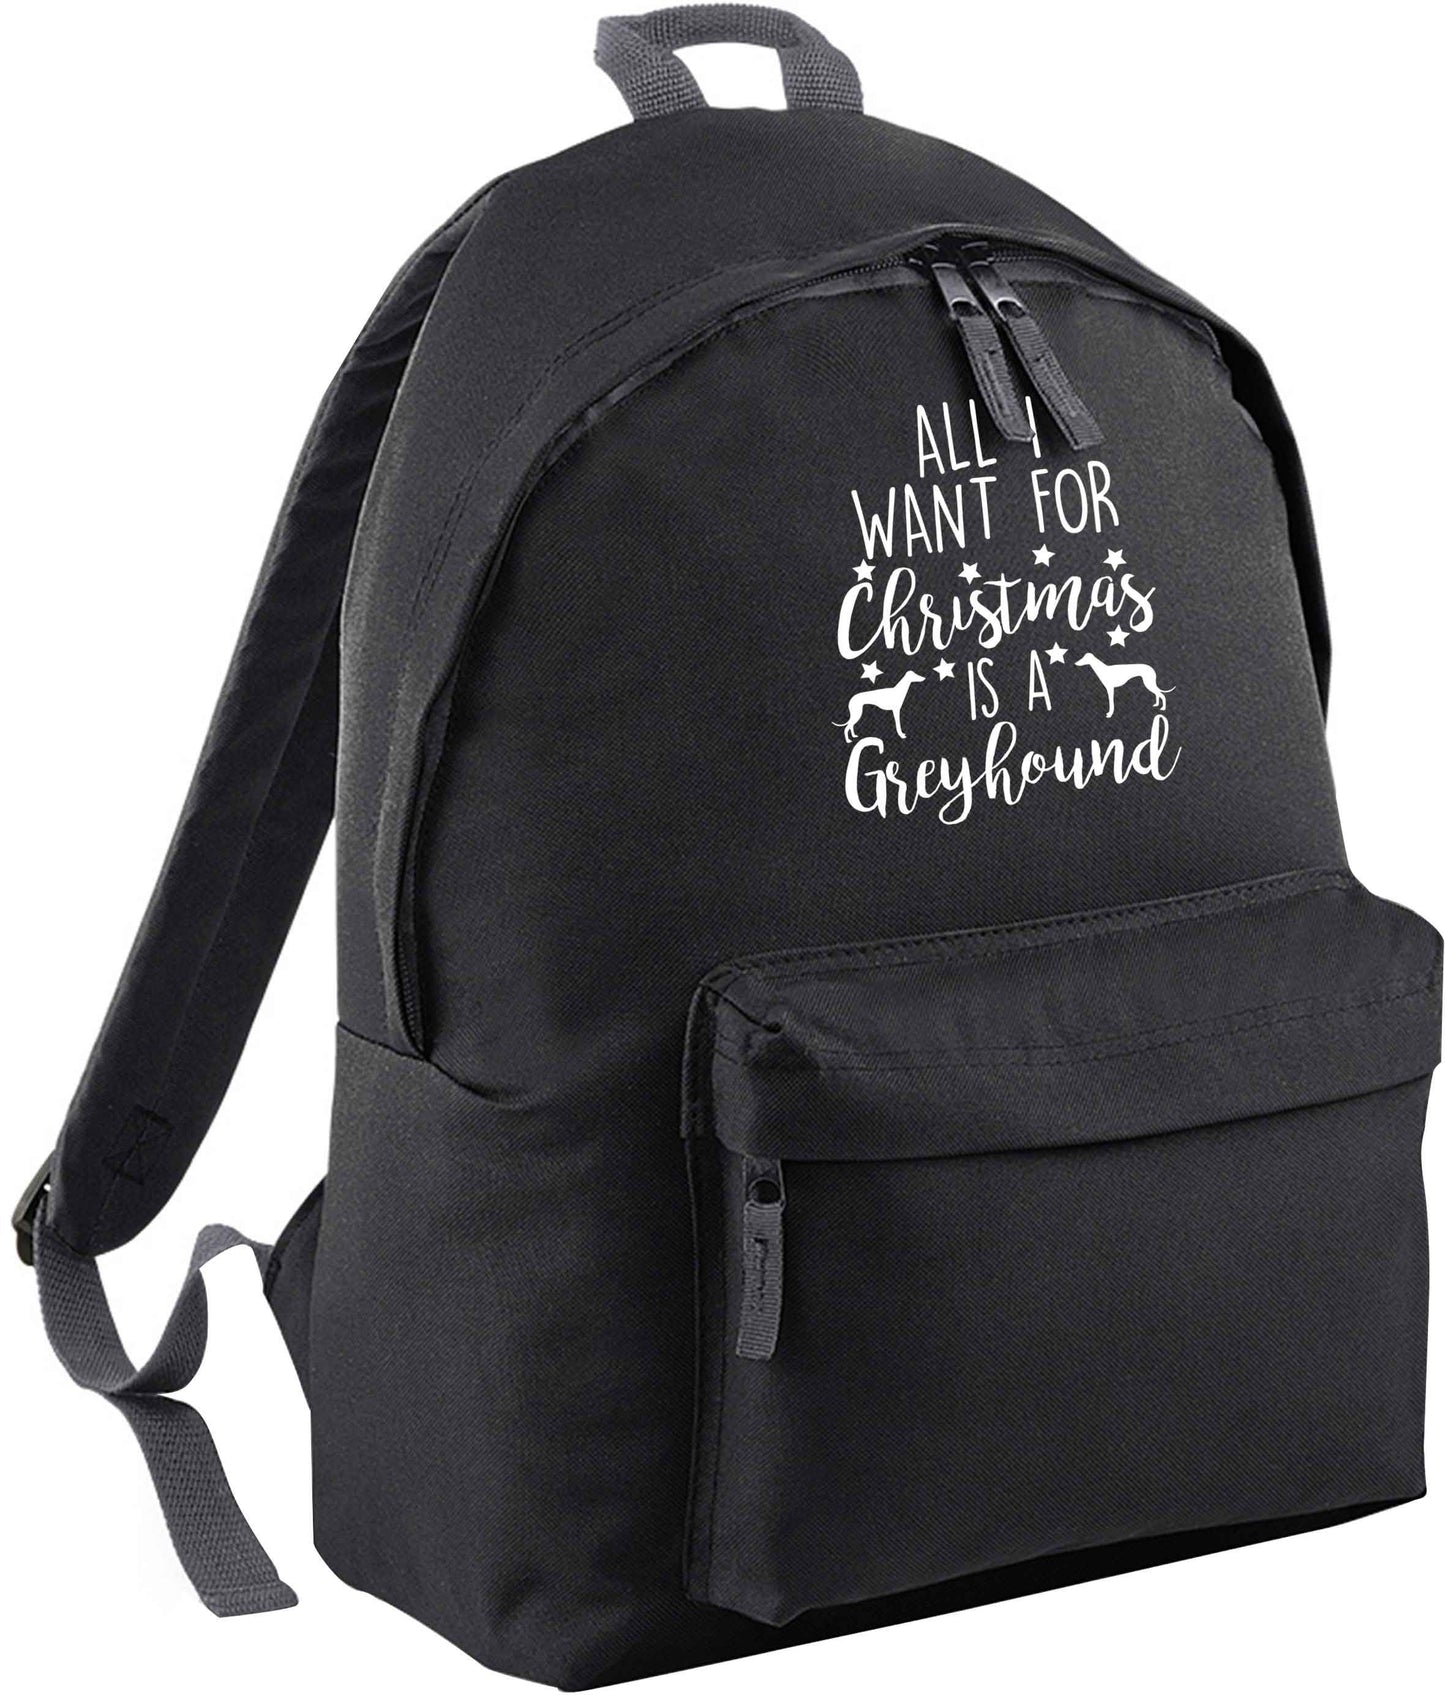 All I want for Christmas is a greyhound black adults backpack